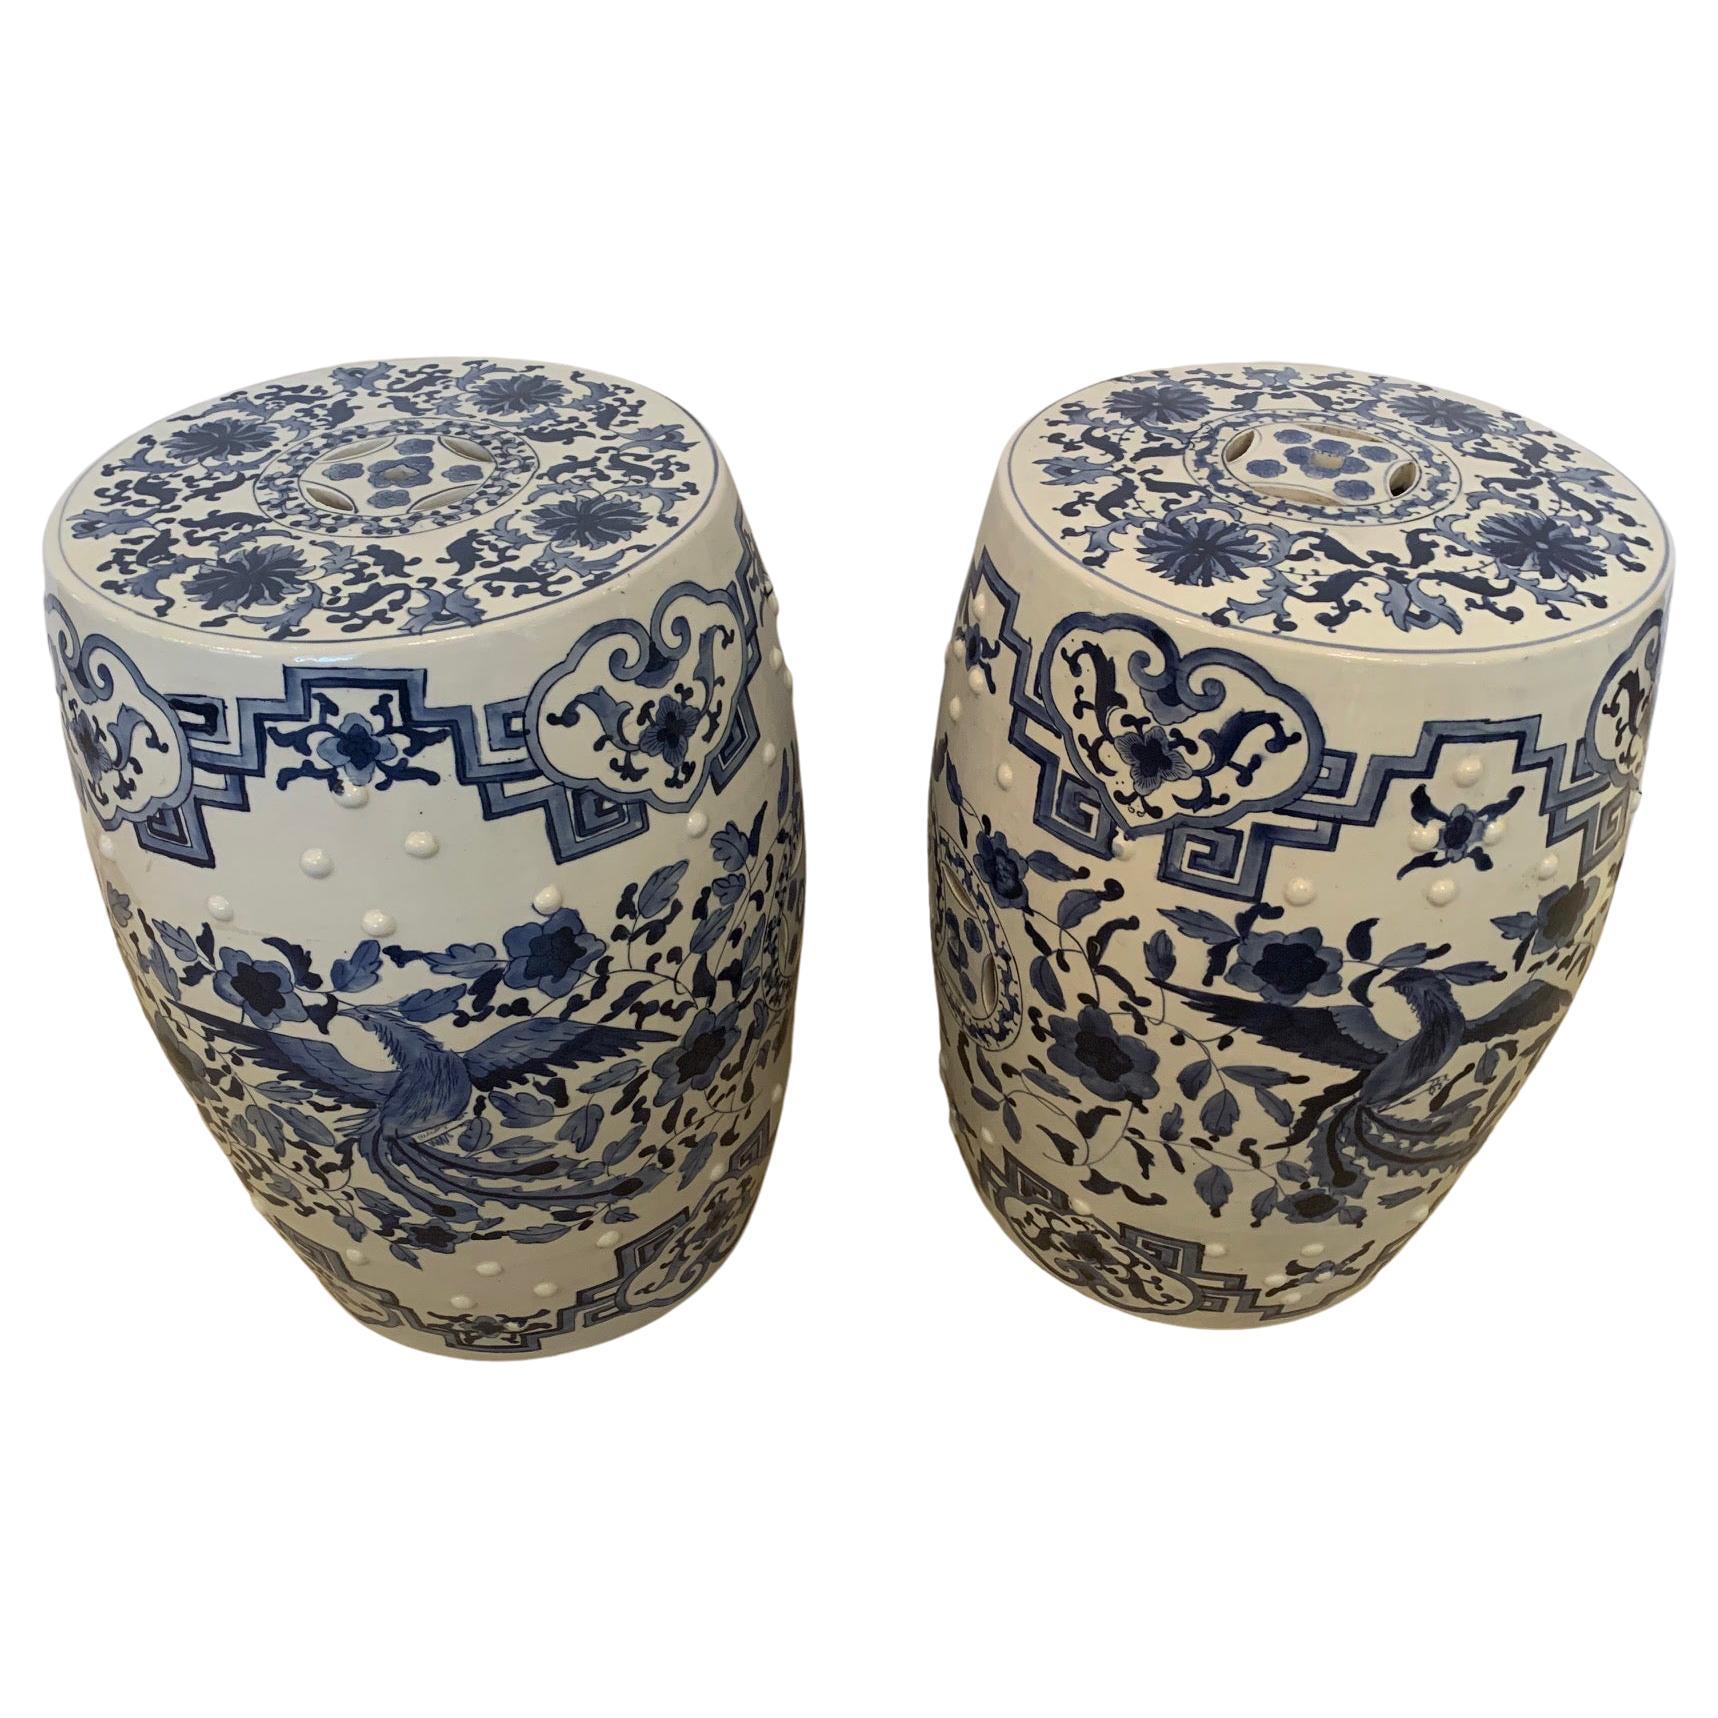 Lovely Pair of Blue and White Ceramic Chinese Garden Seats End Tables